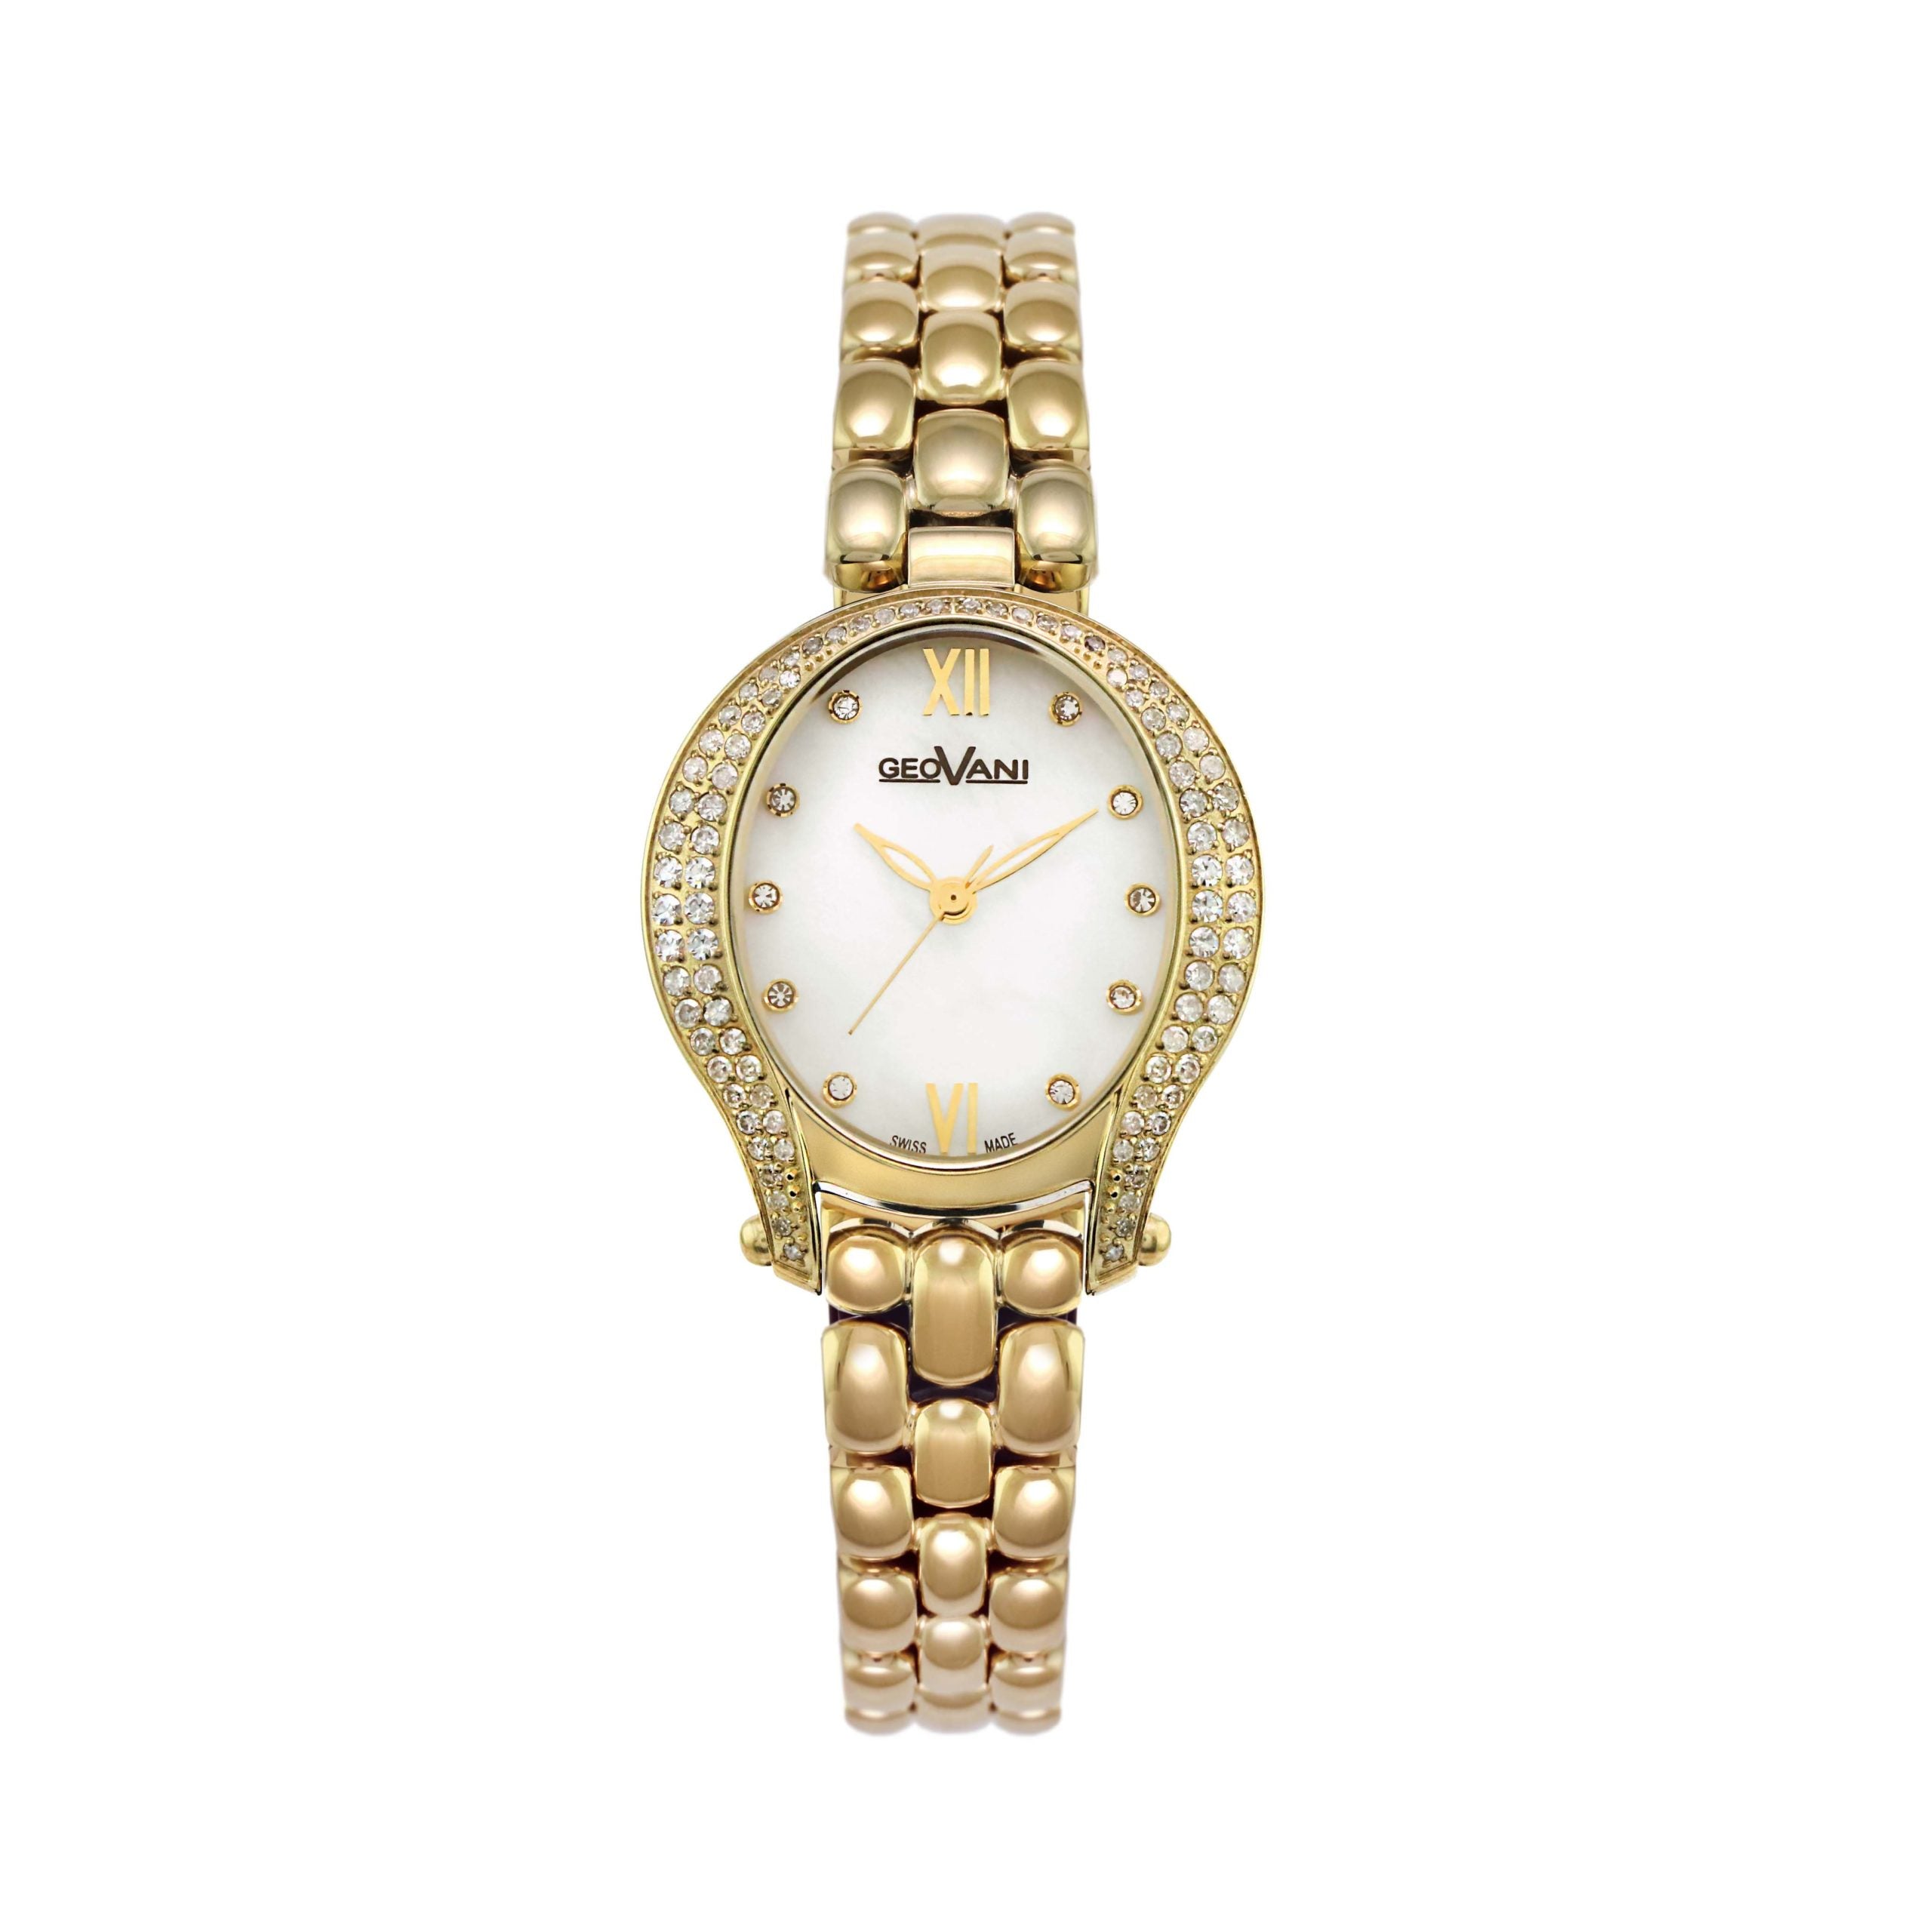 Giovanni Women's Swiss Quartz Watch with Pearly White Dial - GEO-0025